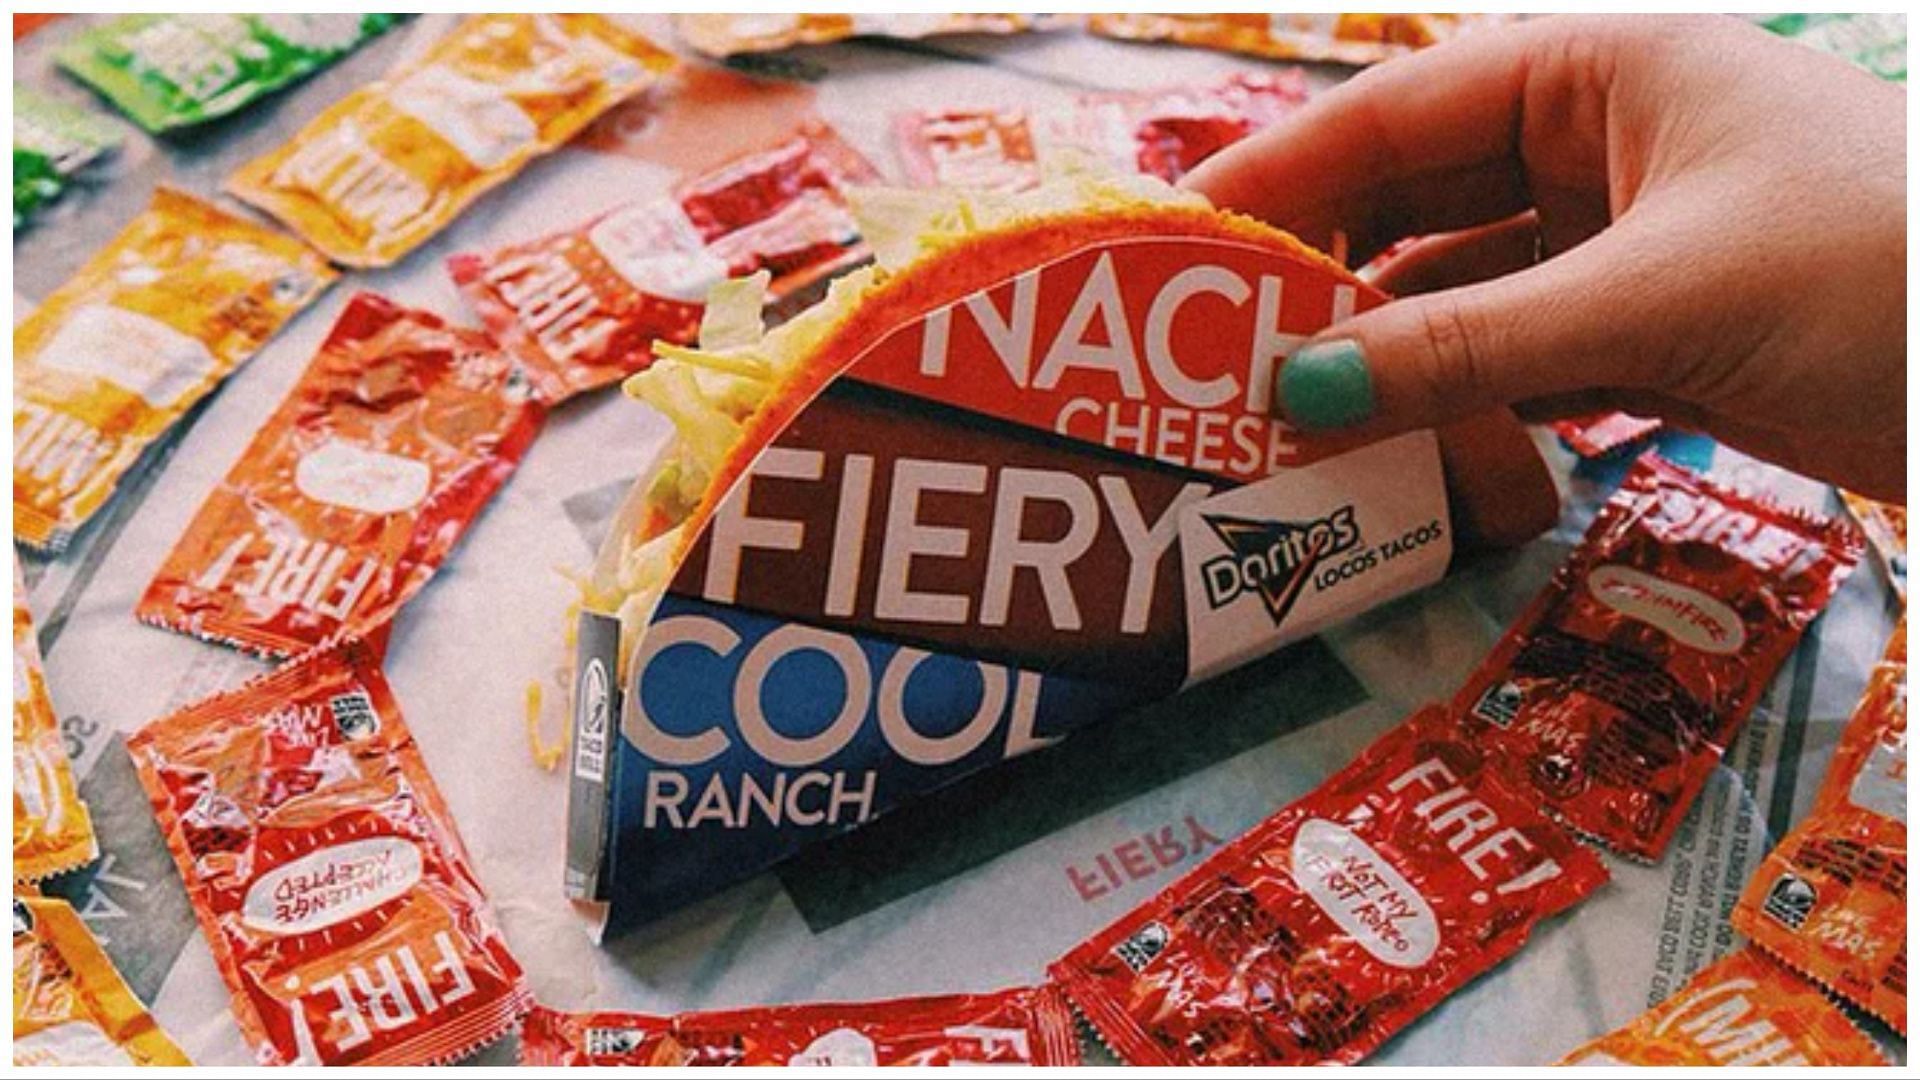 It is a very popular brand that sells tacos (Image via Taco Bell)